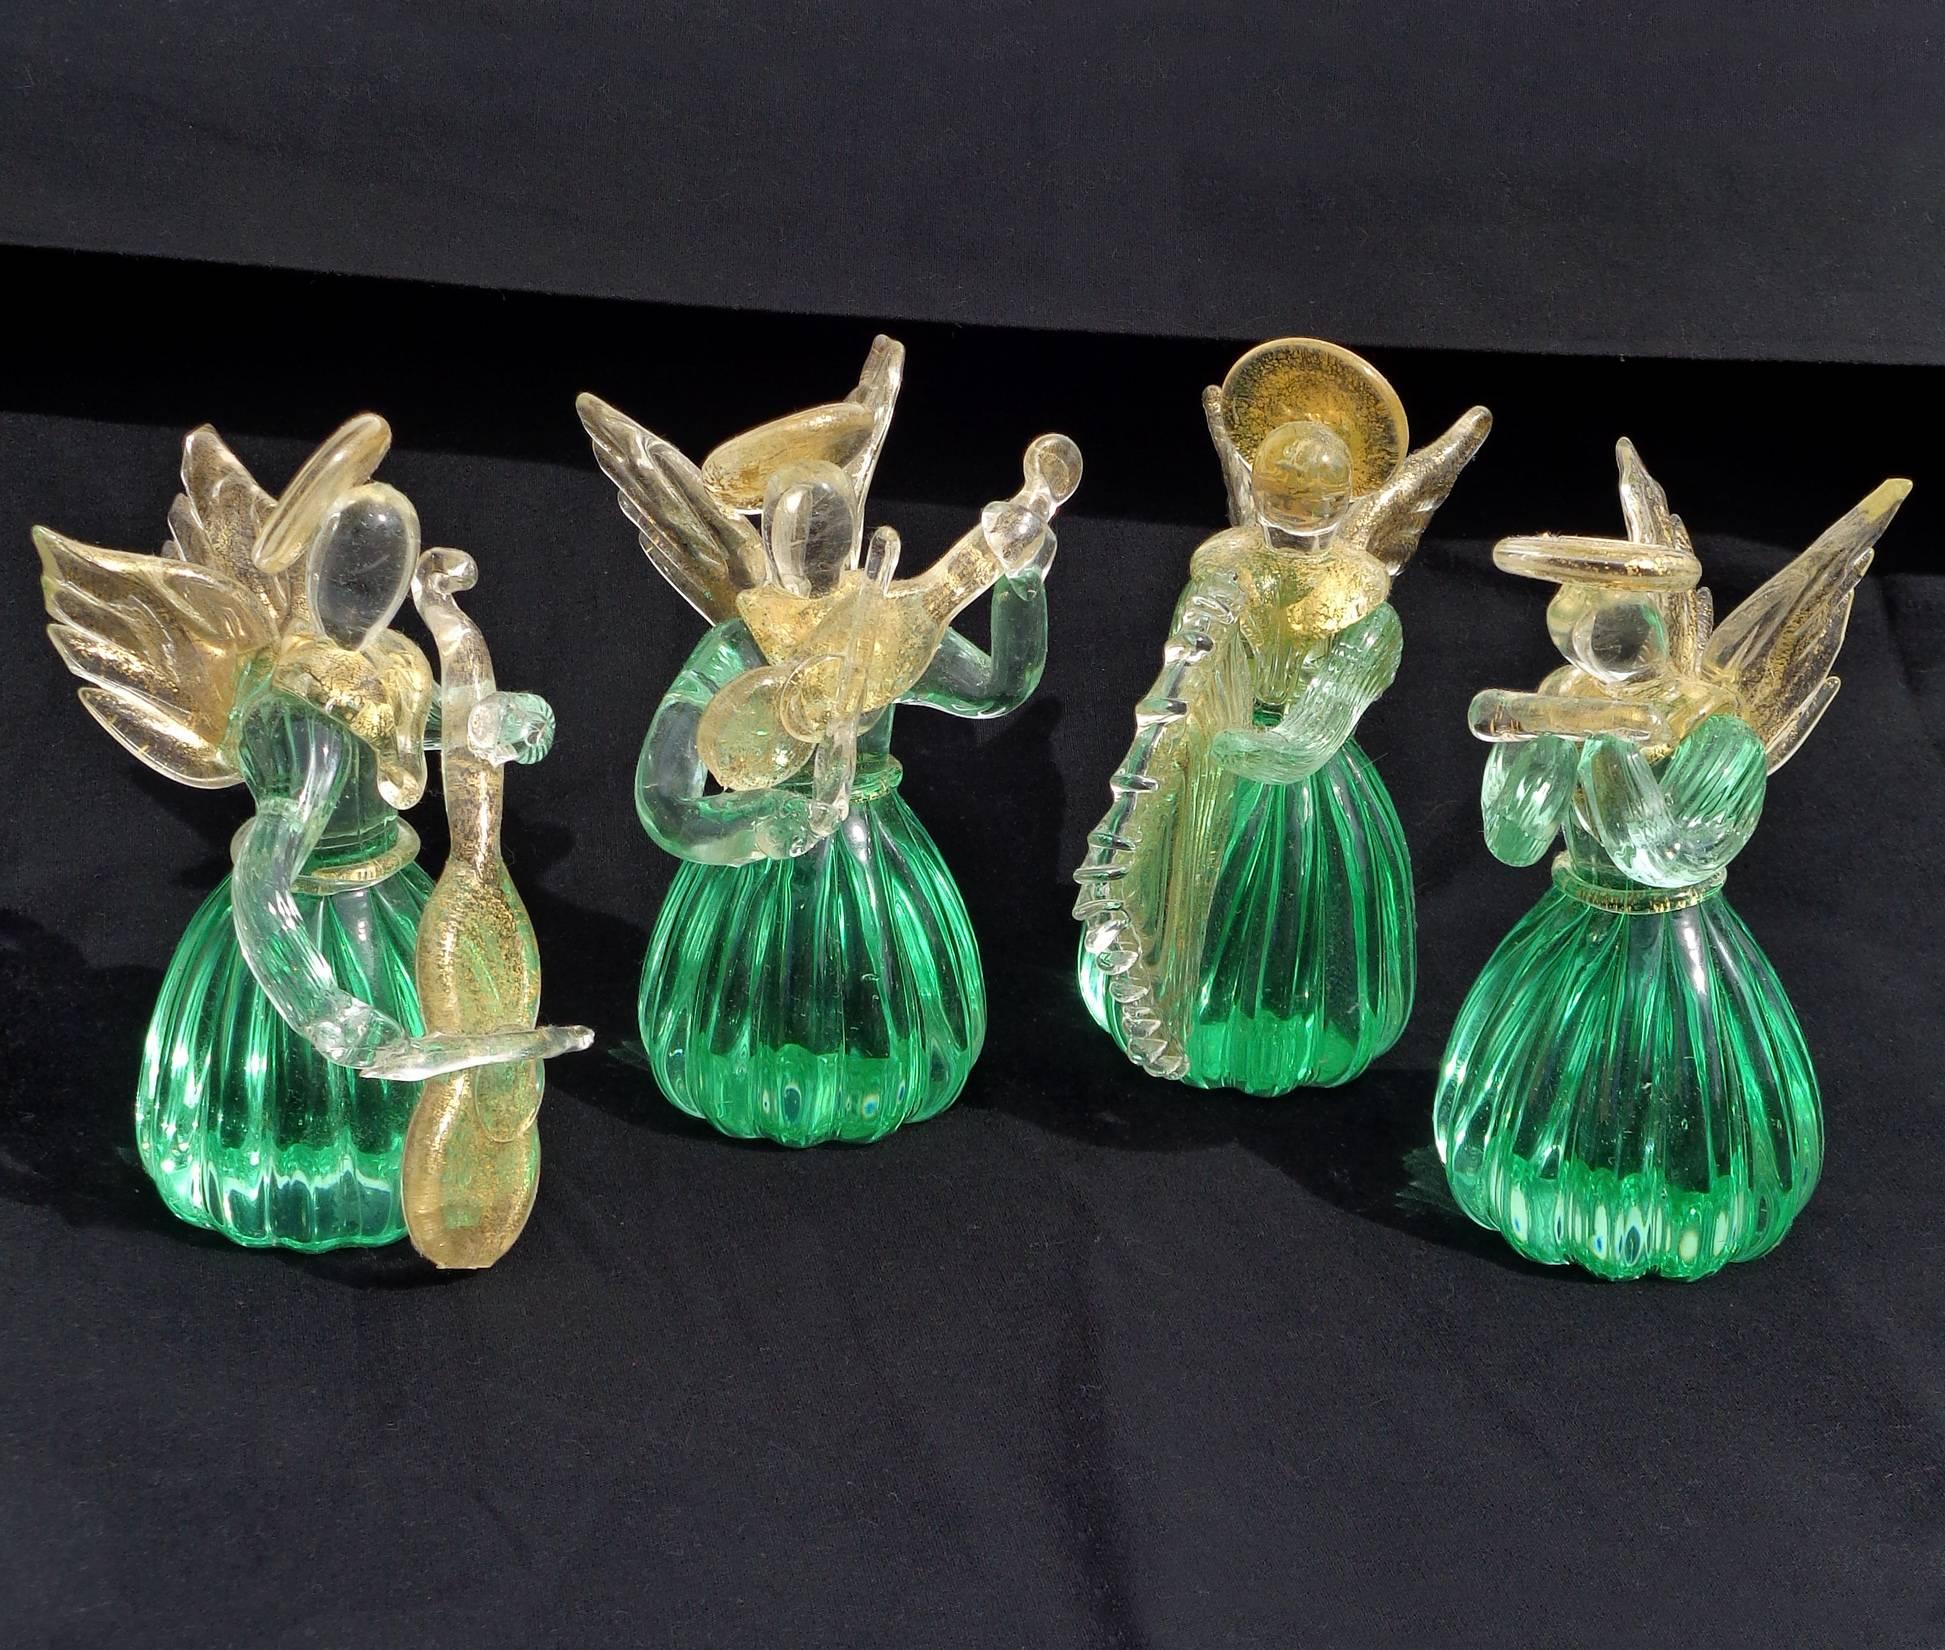 Free shipping worldwide! See details below description.

Very cute set of four Murano handblown green and gold flecks art glass angel musical quartet. Each angel has an instrument, bass, flute, violin and harp. Profusely covered in gold flecks,